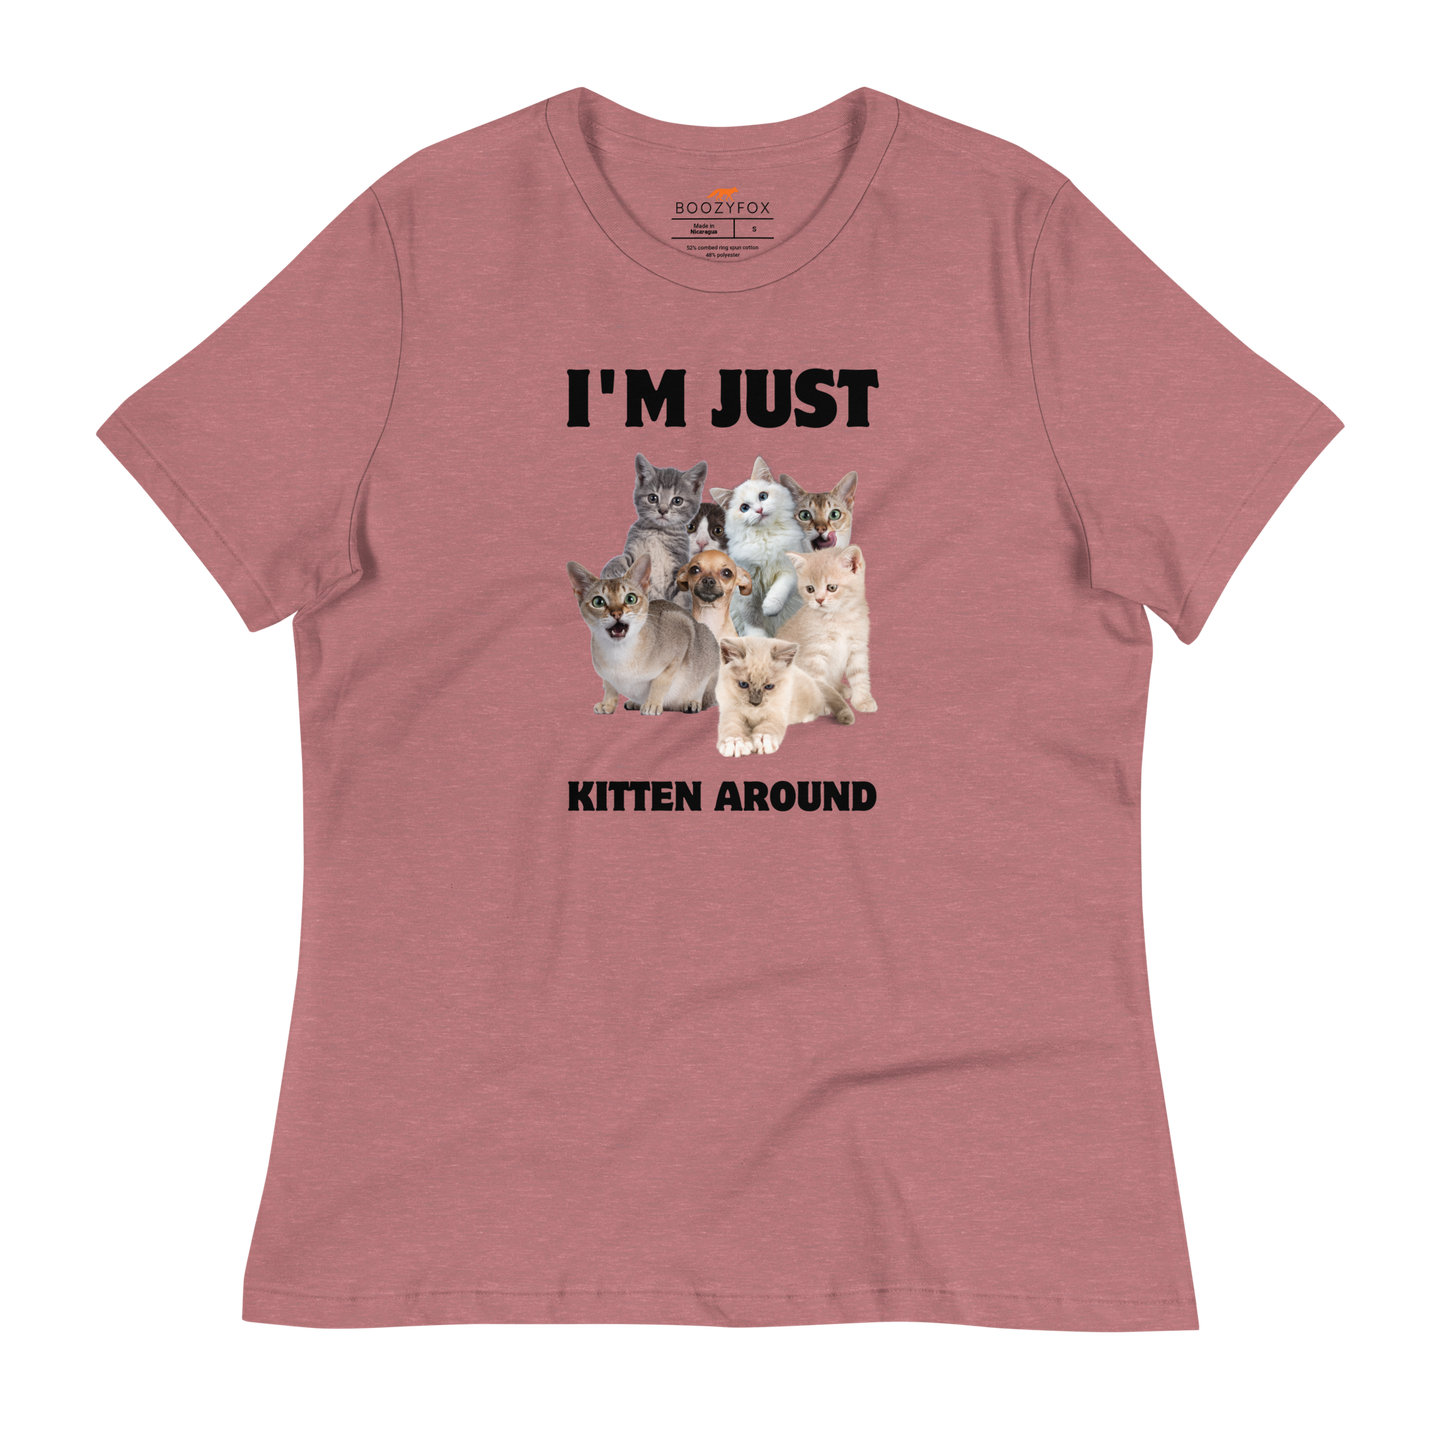 Women's Relaxed Heather Mauve Cat T-Shirt featuring an I'm Just Kitten Around graphic on the chest - Funny Graphic Cat Tees - Boozy Fox